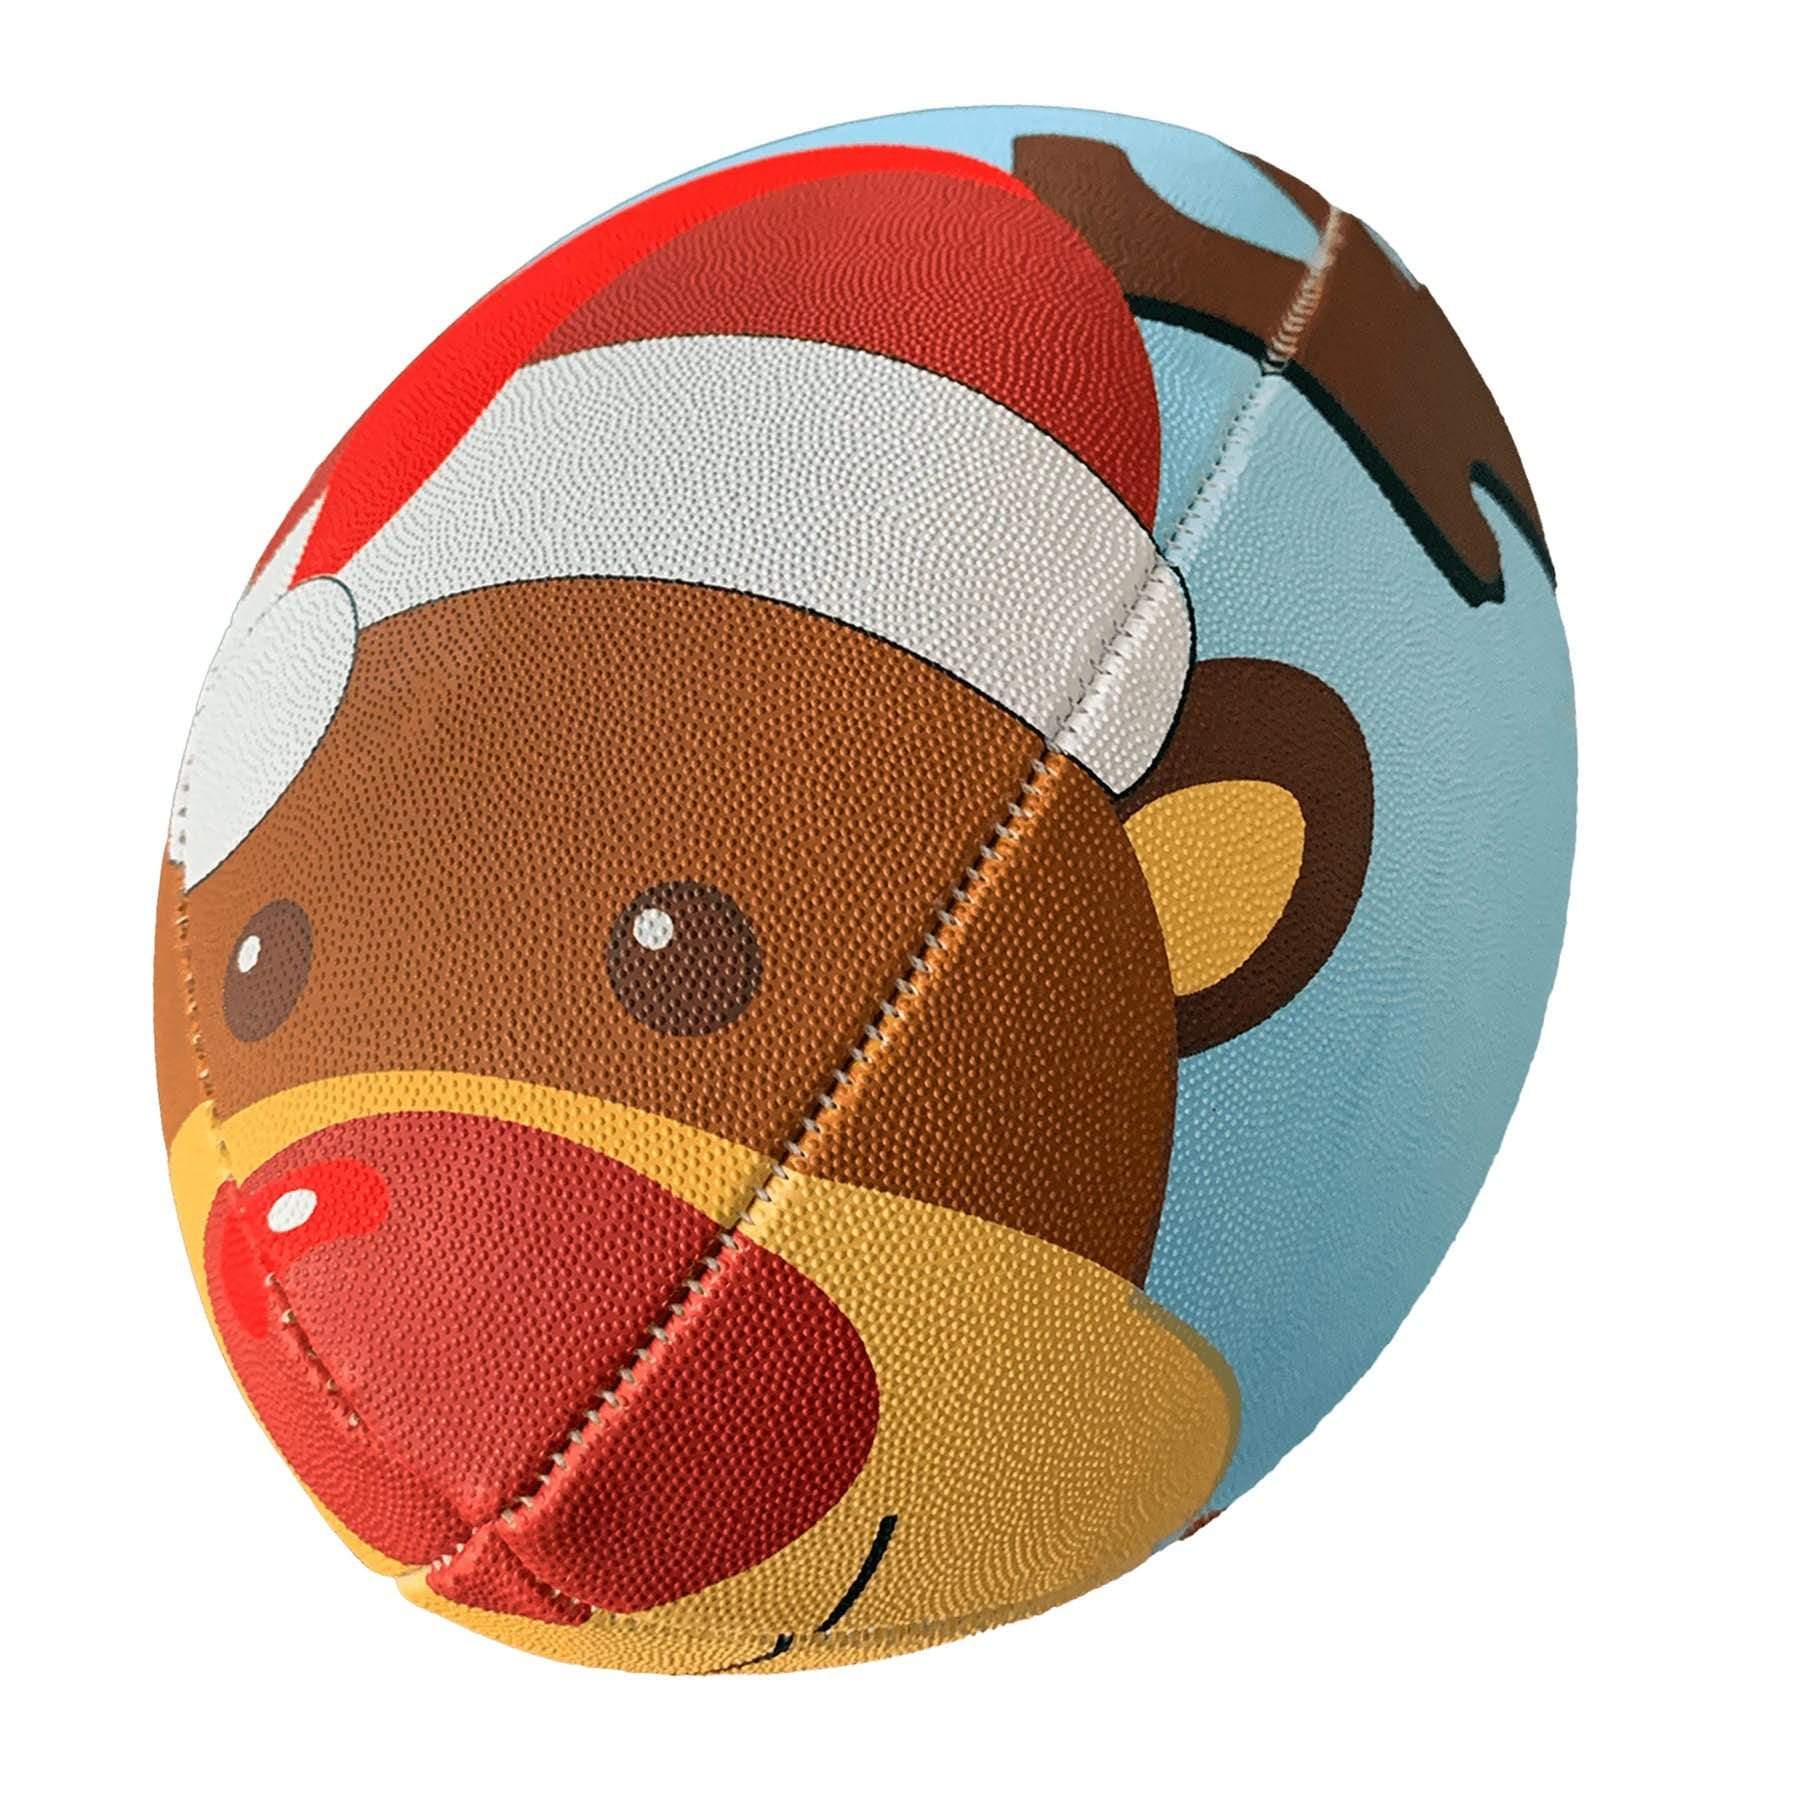 https://cdn.shopify.com/s/files/1/0092/5312/6259/products/rugby-imports-gilbert-rudolph-reindeer-rugby-ball-13808643276915_2000x.jpg?v=1701668917